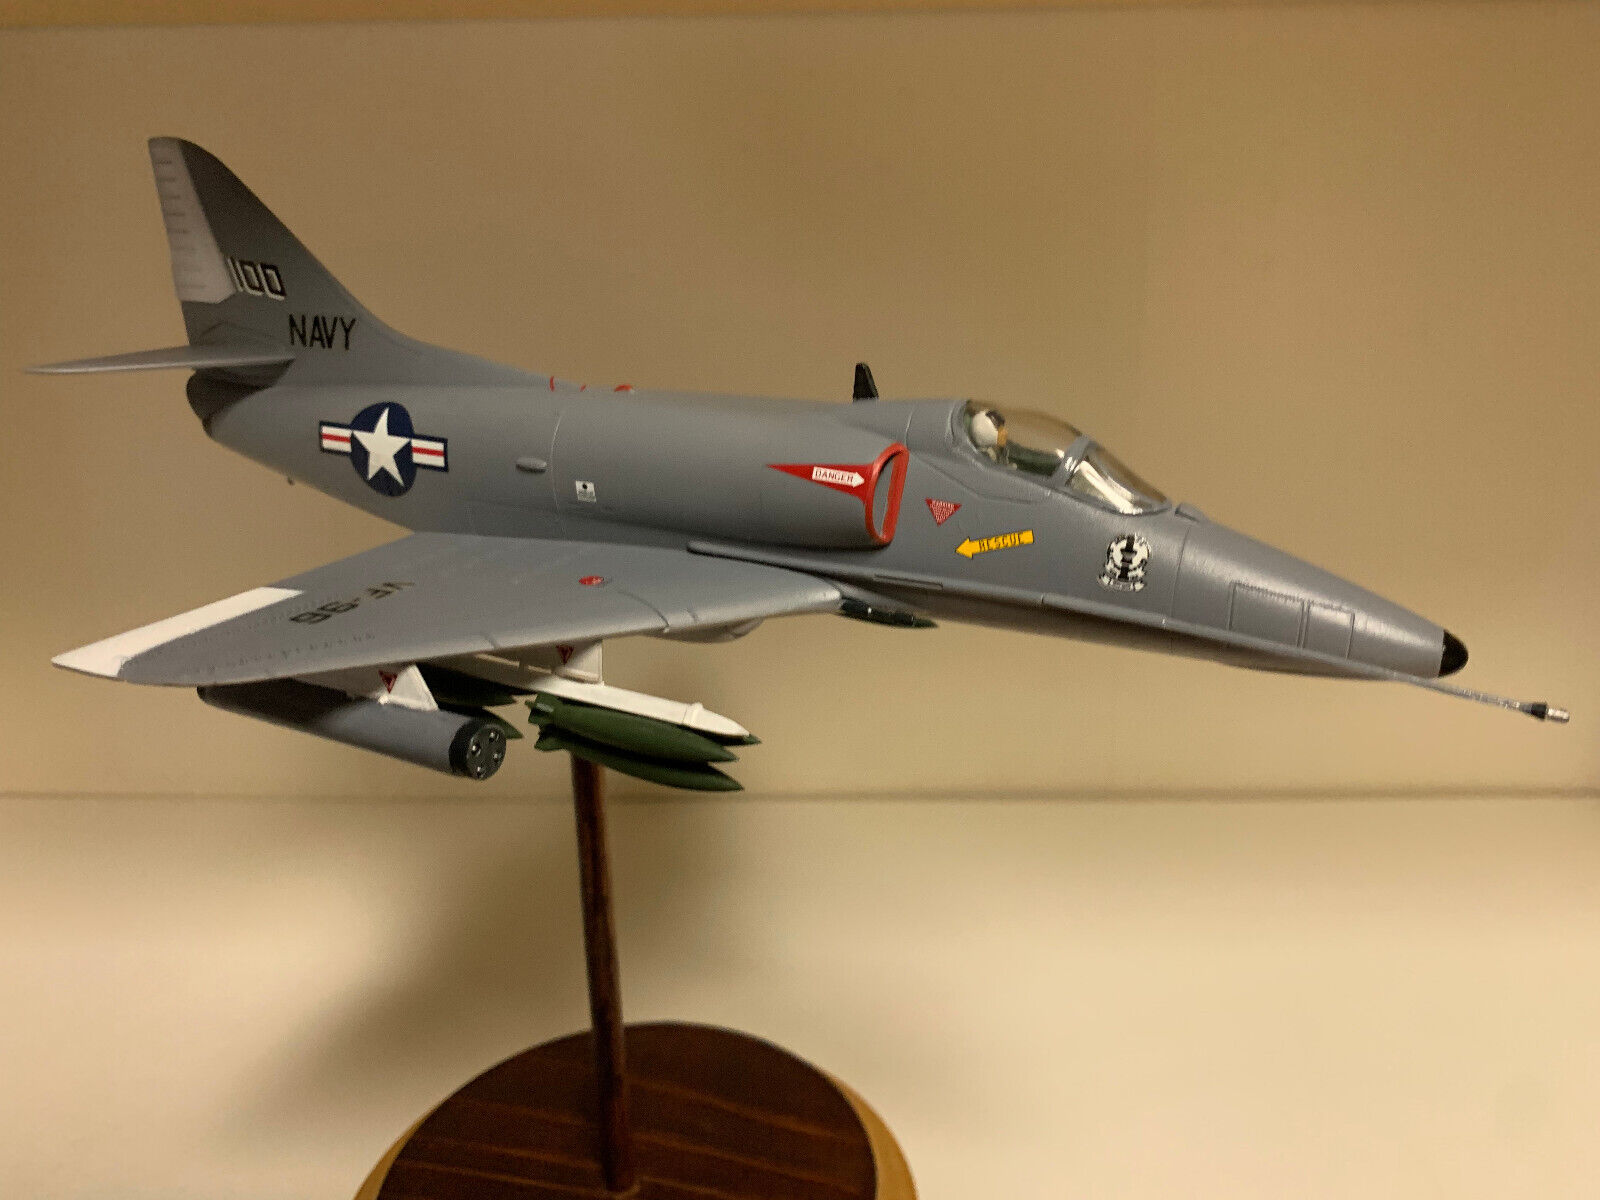 Mc DONNELL DOUGLAS  A-4E SKYHAWK scale 1:48  WITH WOOD STAND  - MUSEUM QUALITY